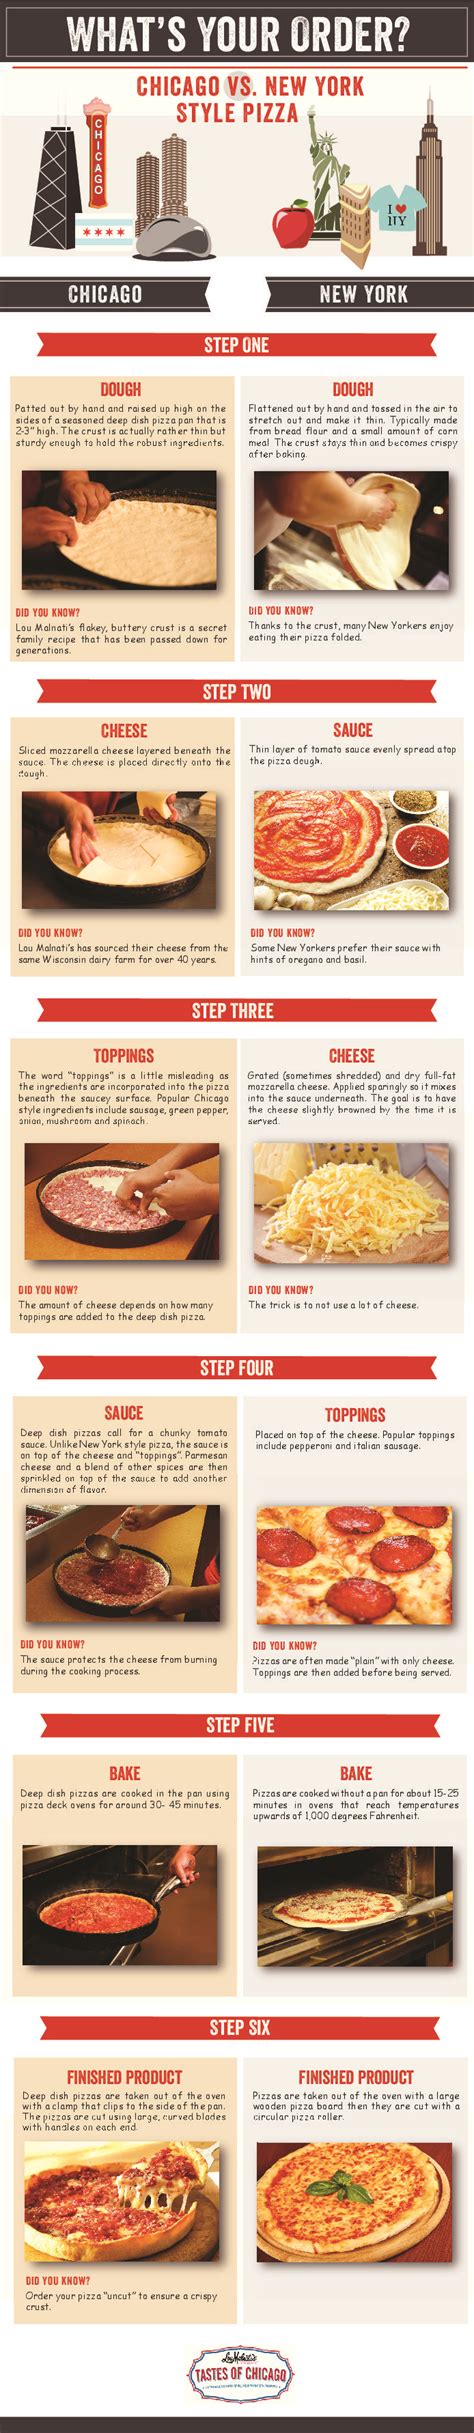 Chicago Vs New York Style Pizza Infographic Visualistan